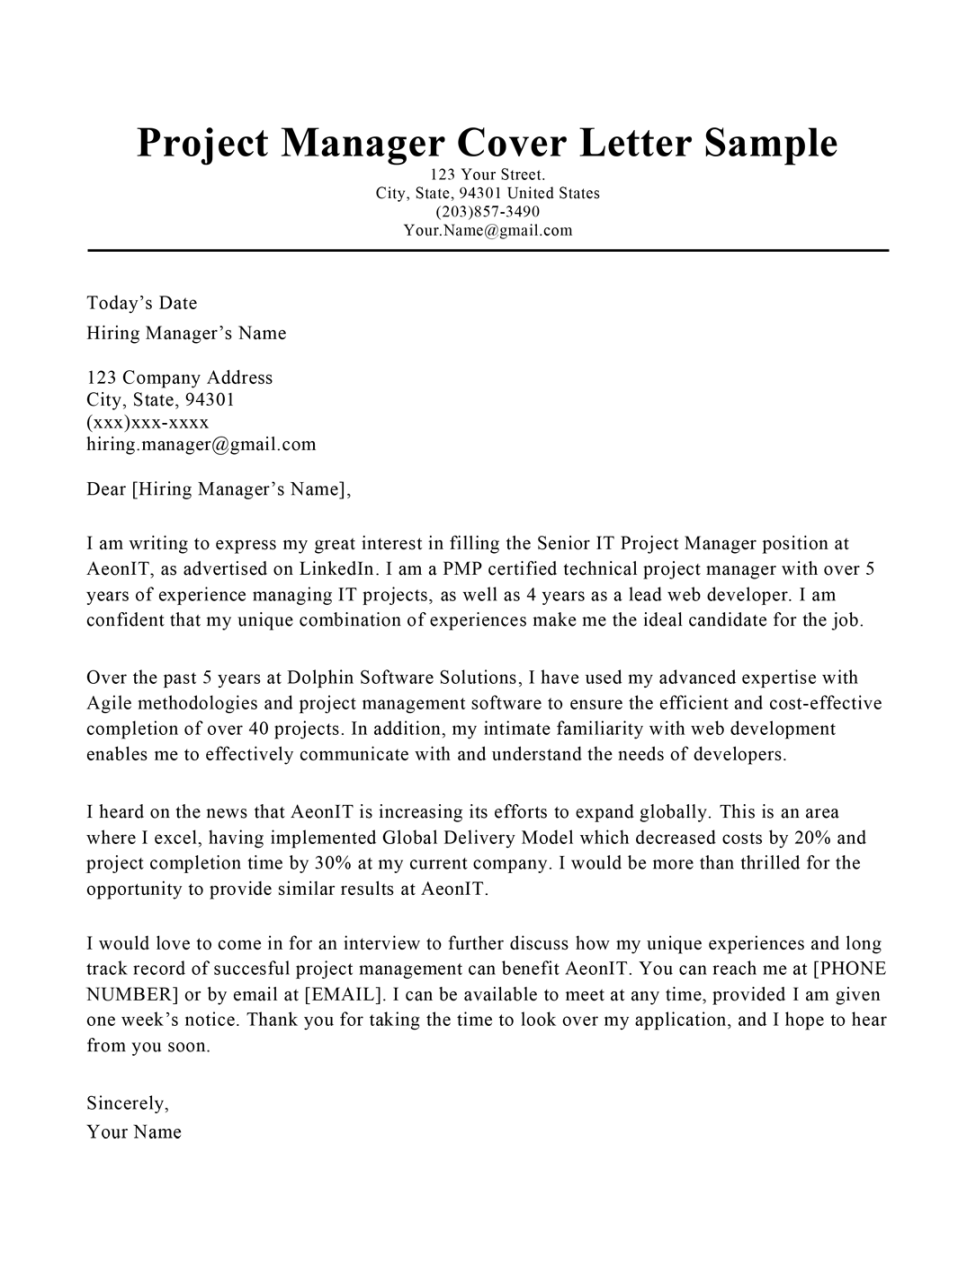 Project Manager Cover Letter Sample & Tips  Resume Companion